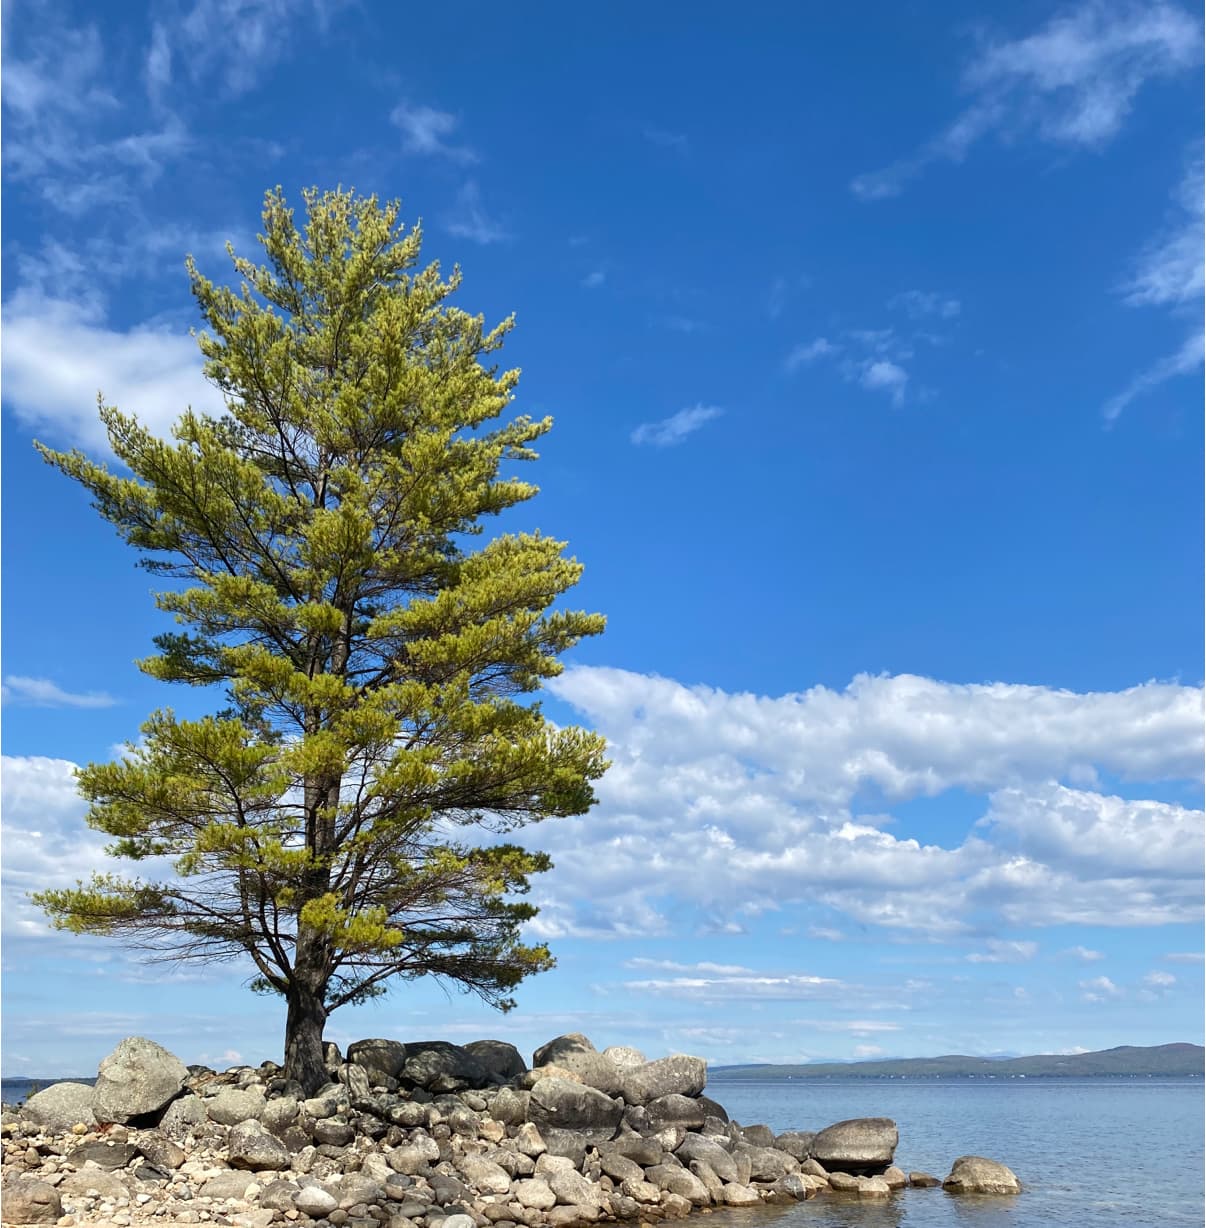 A large tree with green leaves and rocks surrounding it on the water with blue skies